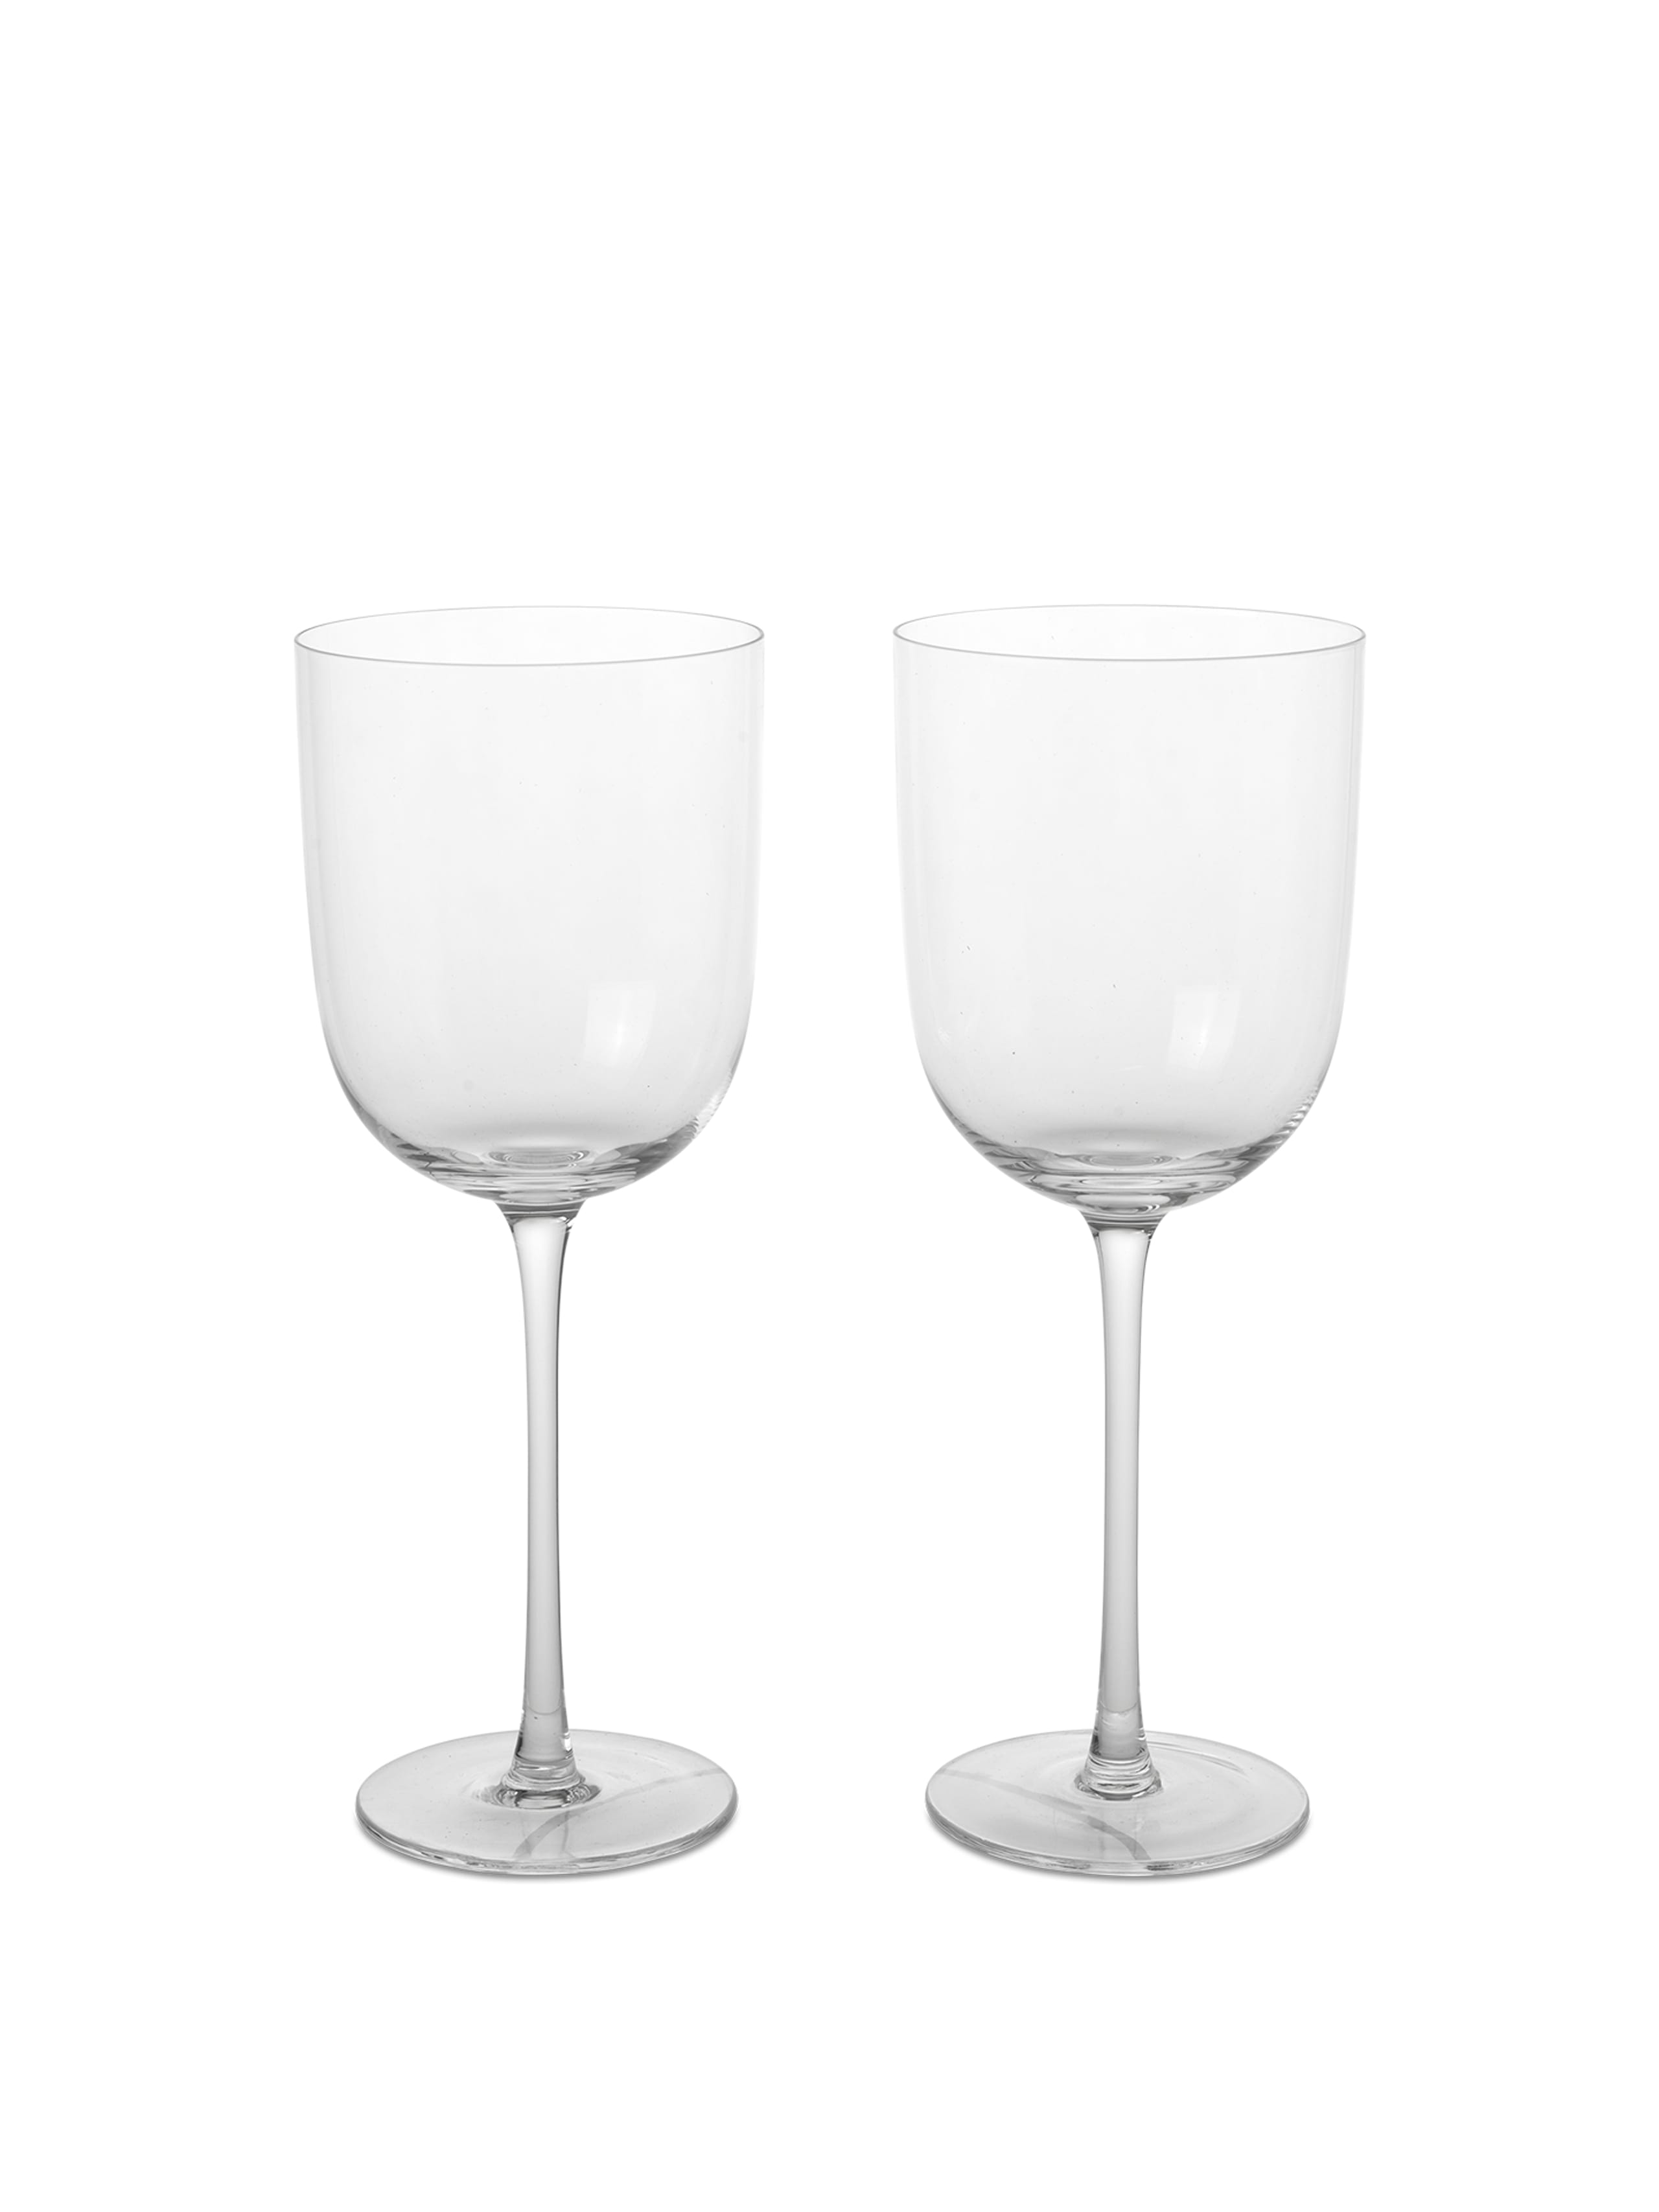 Ferm Living - Weinglas - Host Red Wine Glasses - Host Red Wine Glasses - Set of 2 - Clear